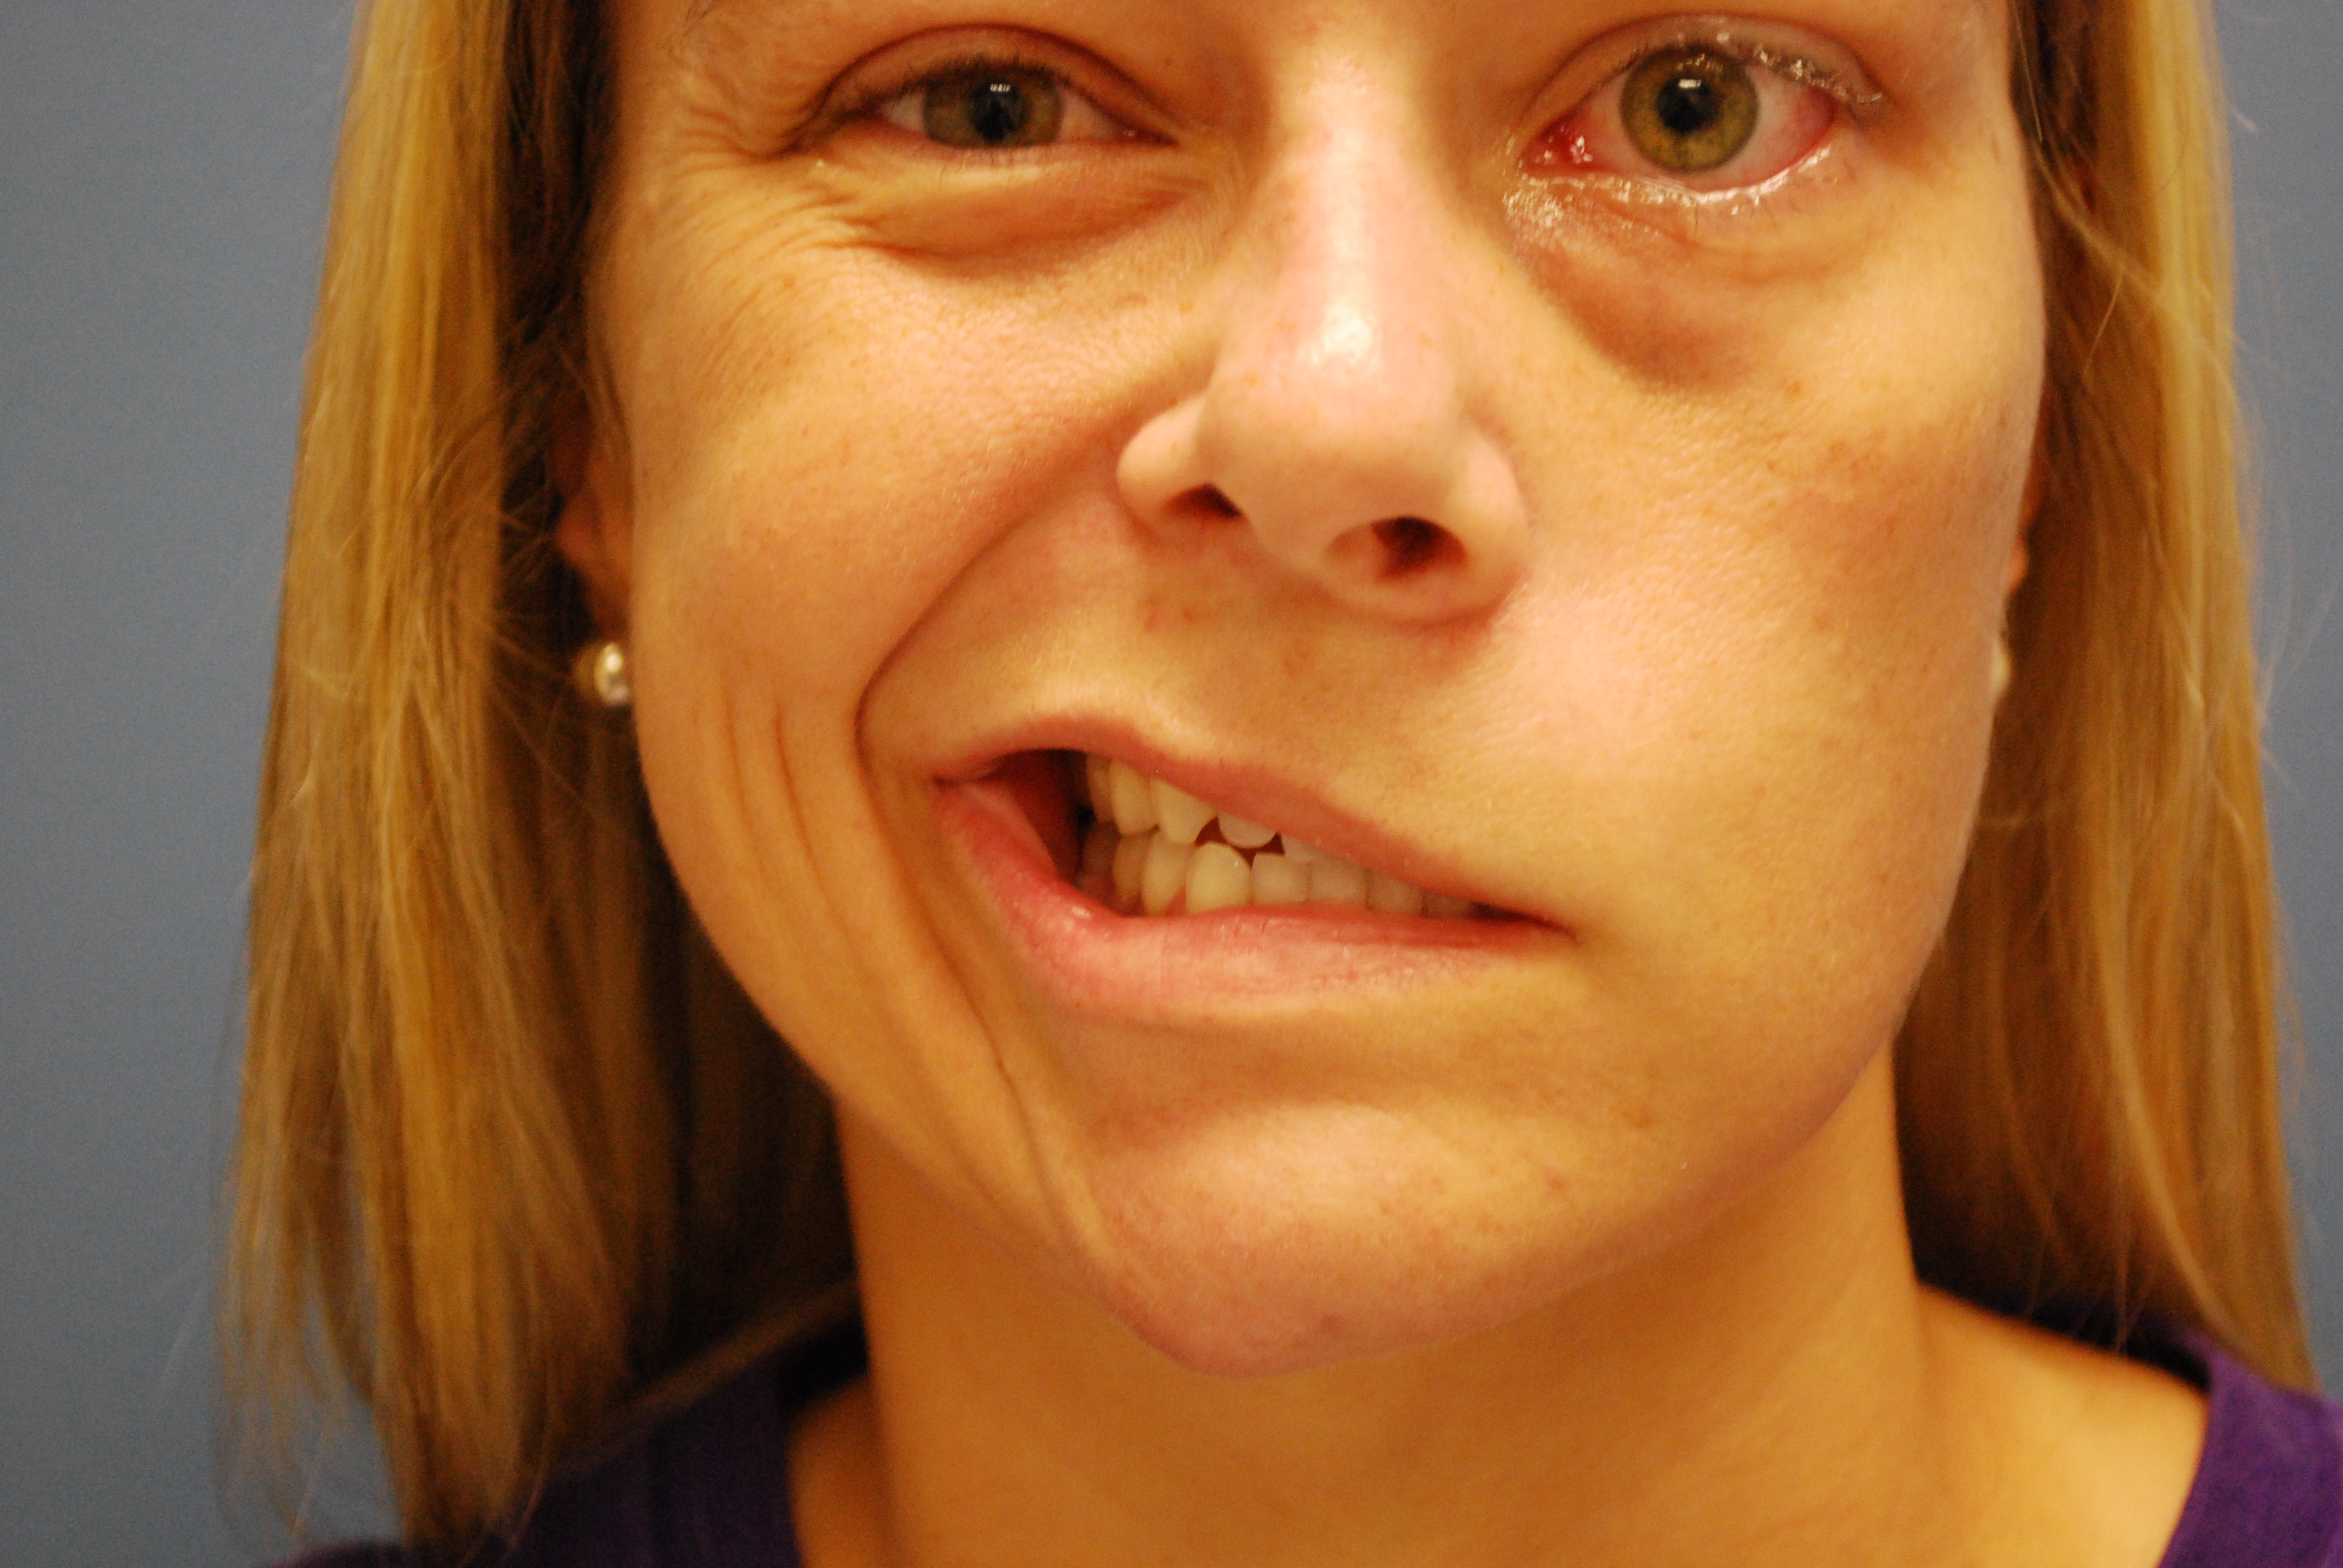 Loss of Smile closure due to facial nerve paralysis